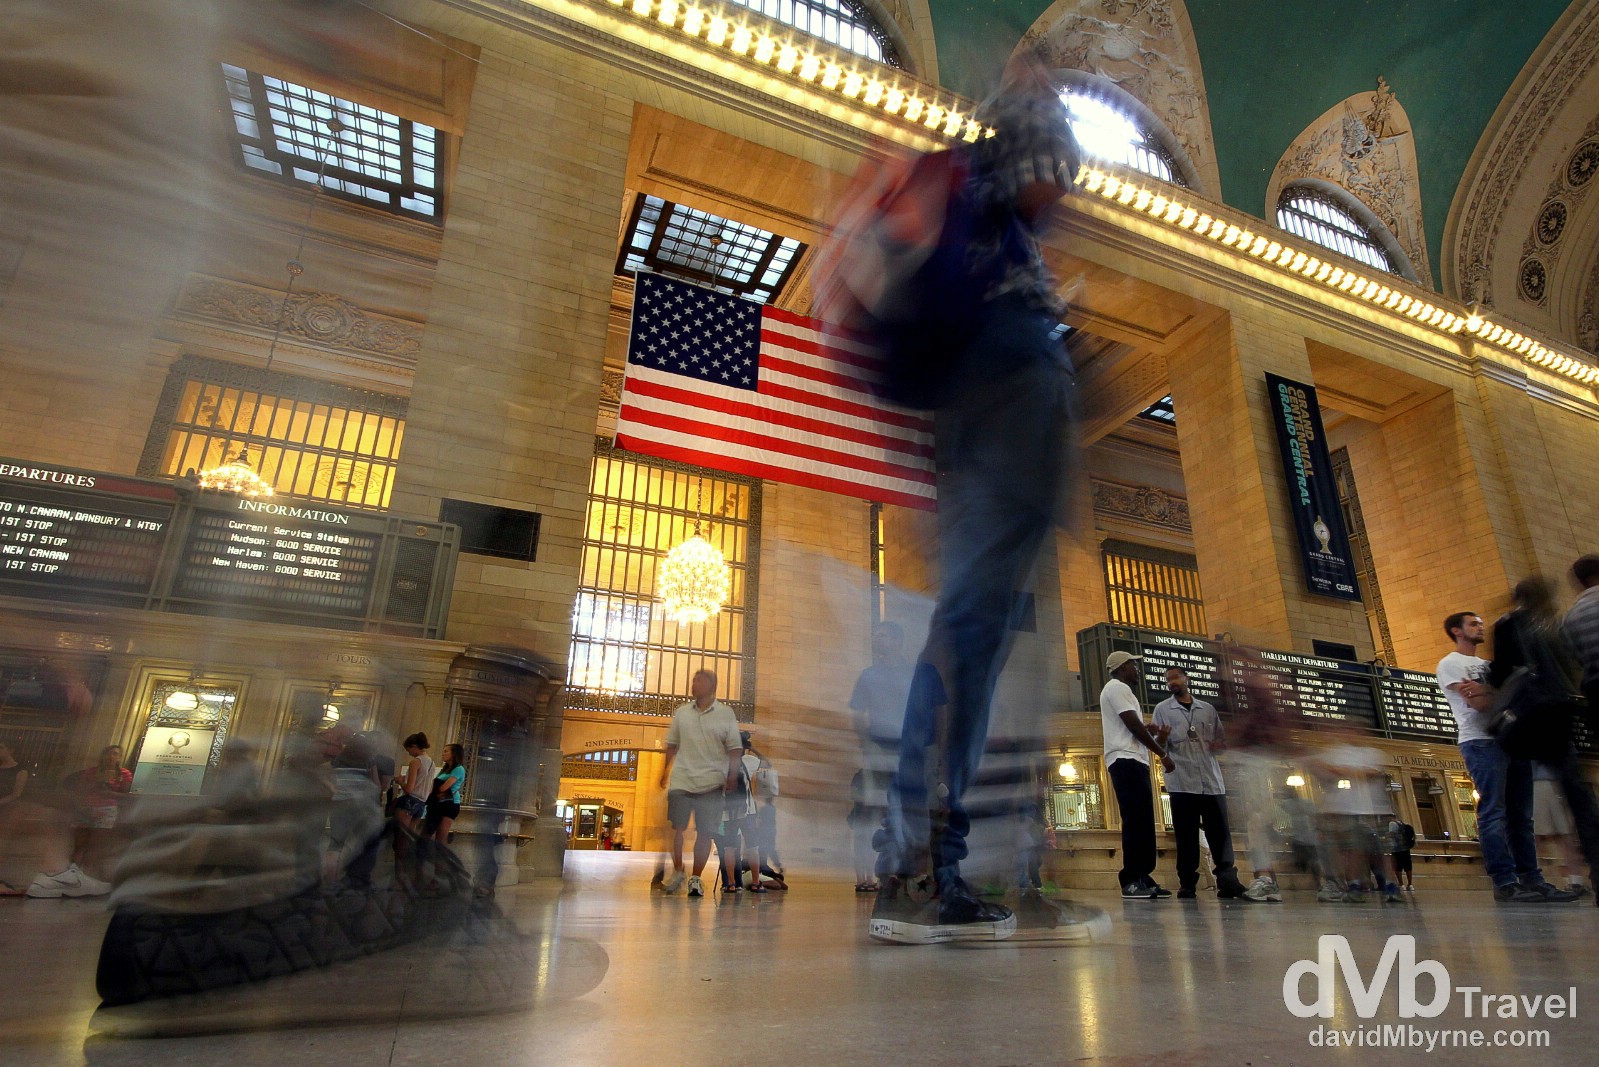 Grand Central Station/Terminal, New York City, USA. July 13th 2013.